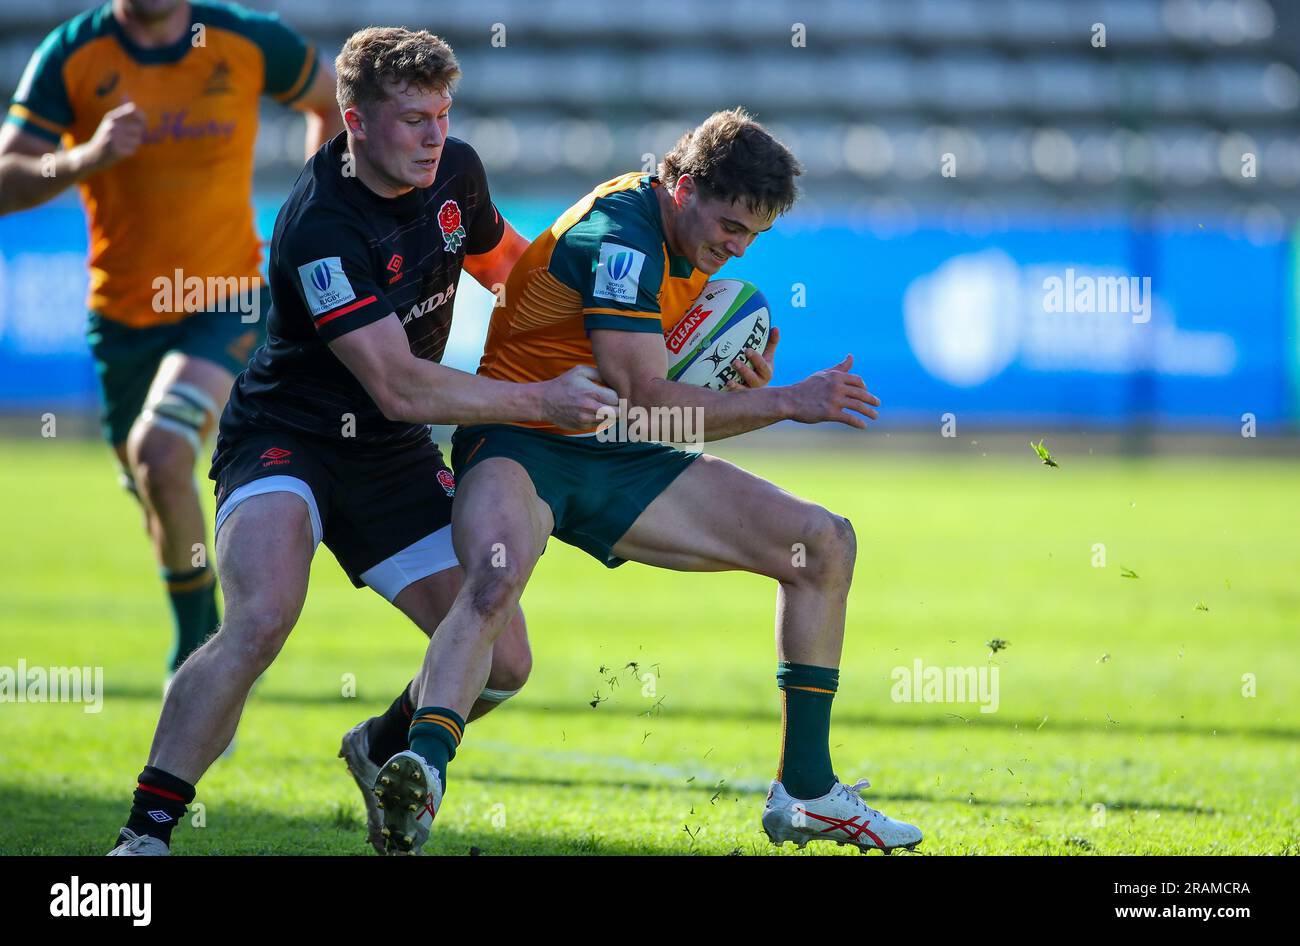 Cape Town, SOUTH AFRICA - Tuesday 04 July 2023, Joe Woodward of England tackles Teddy Wilson of Australia during the World Rugby U20 Championship match between Australia and England at Athlone Stadium in Cape Town, South Africa. Stock Photo